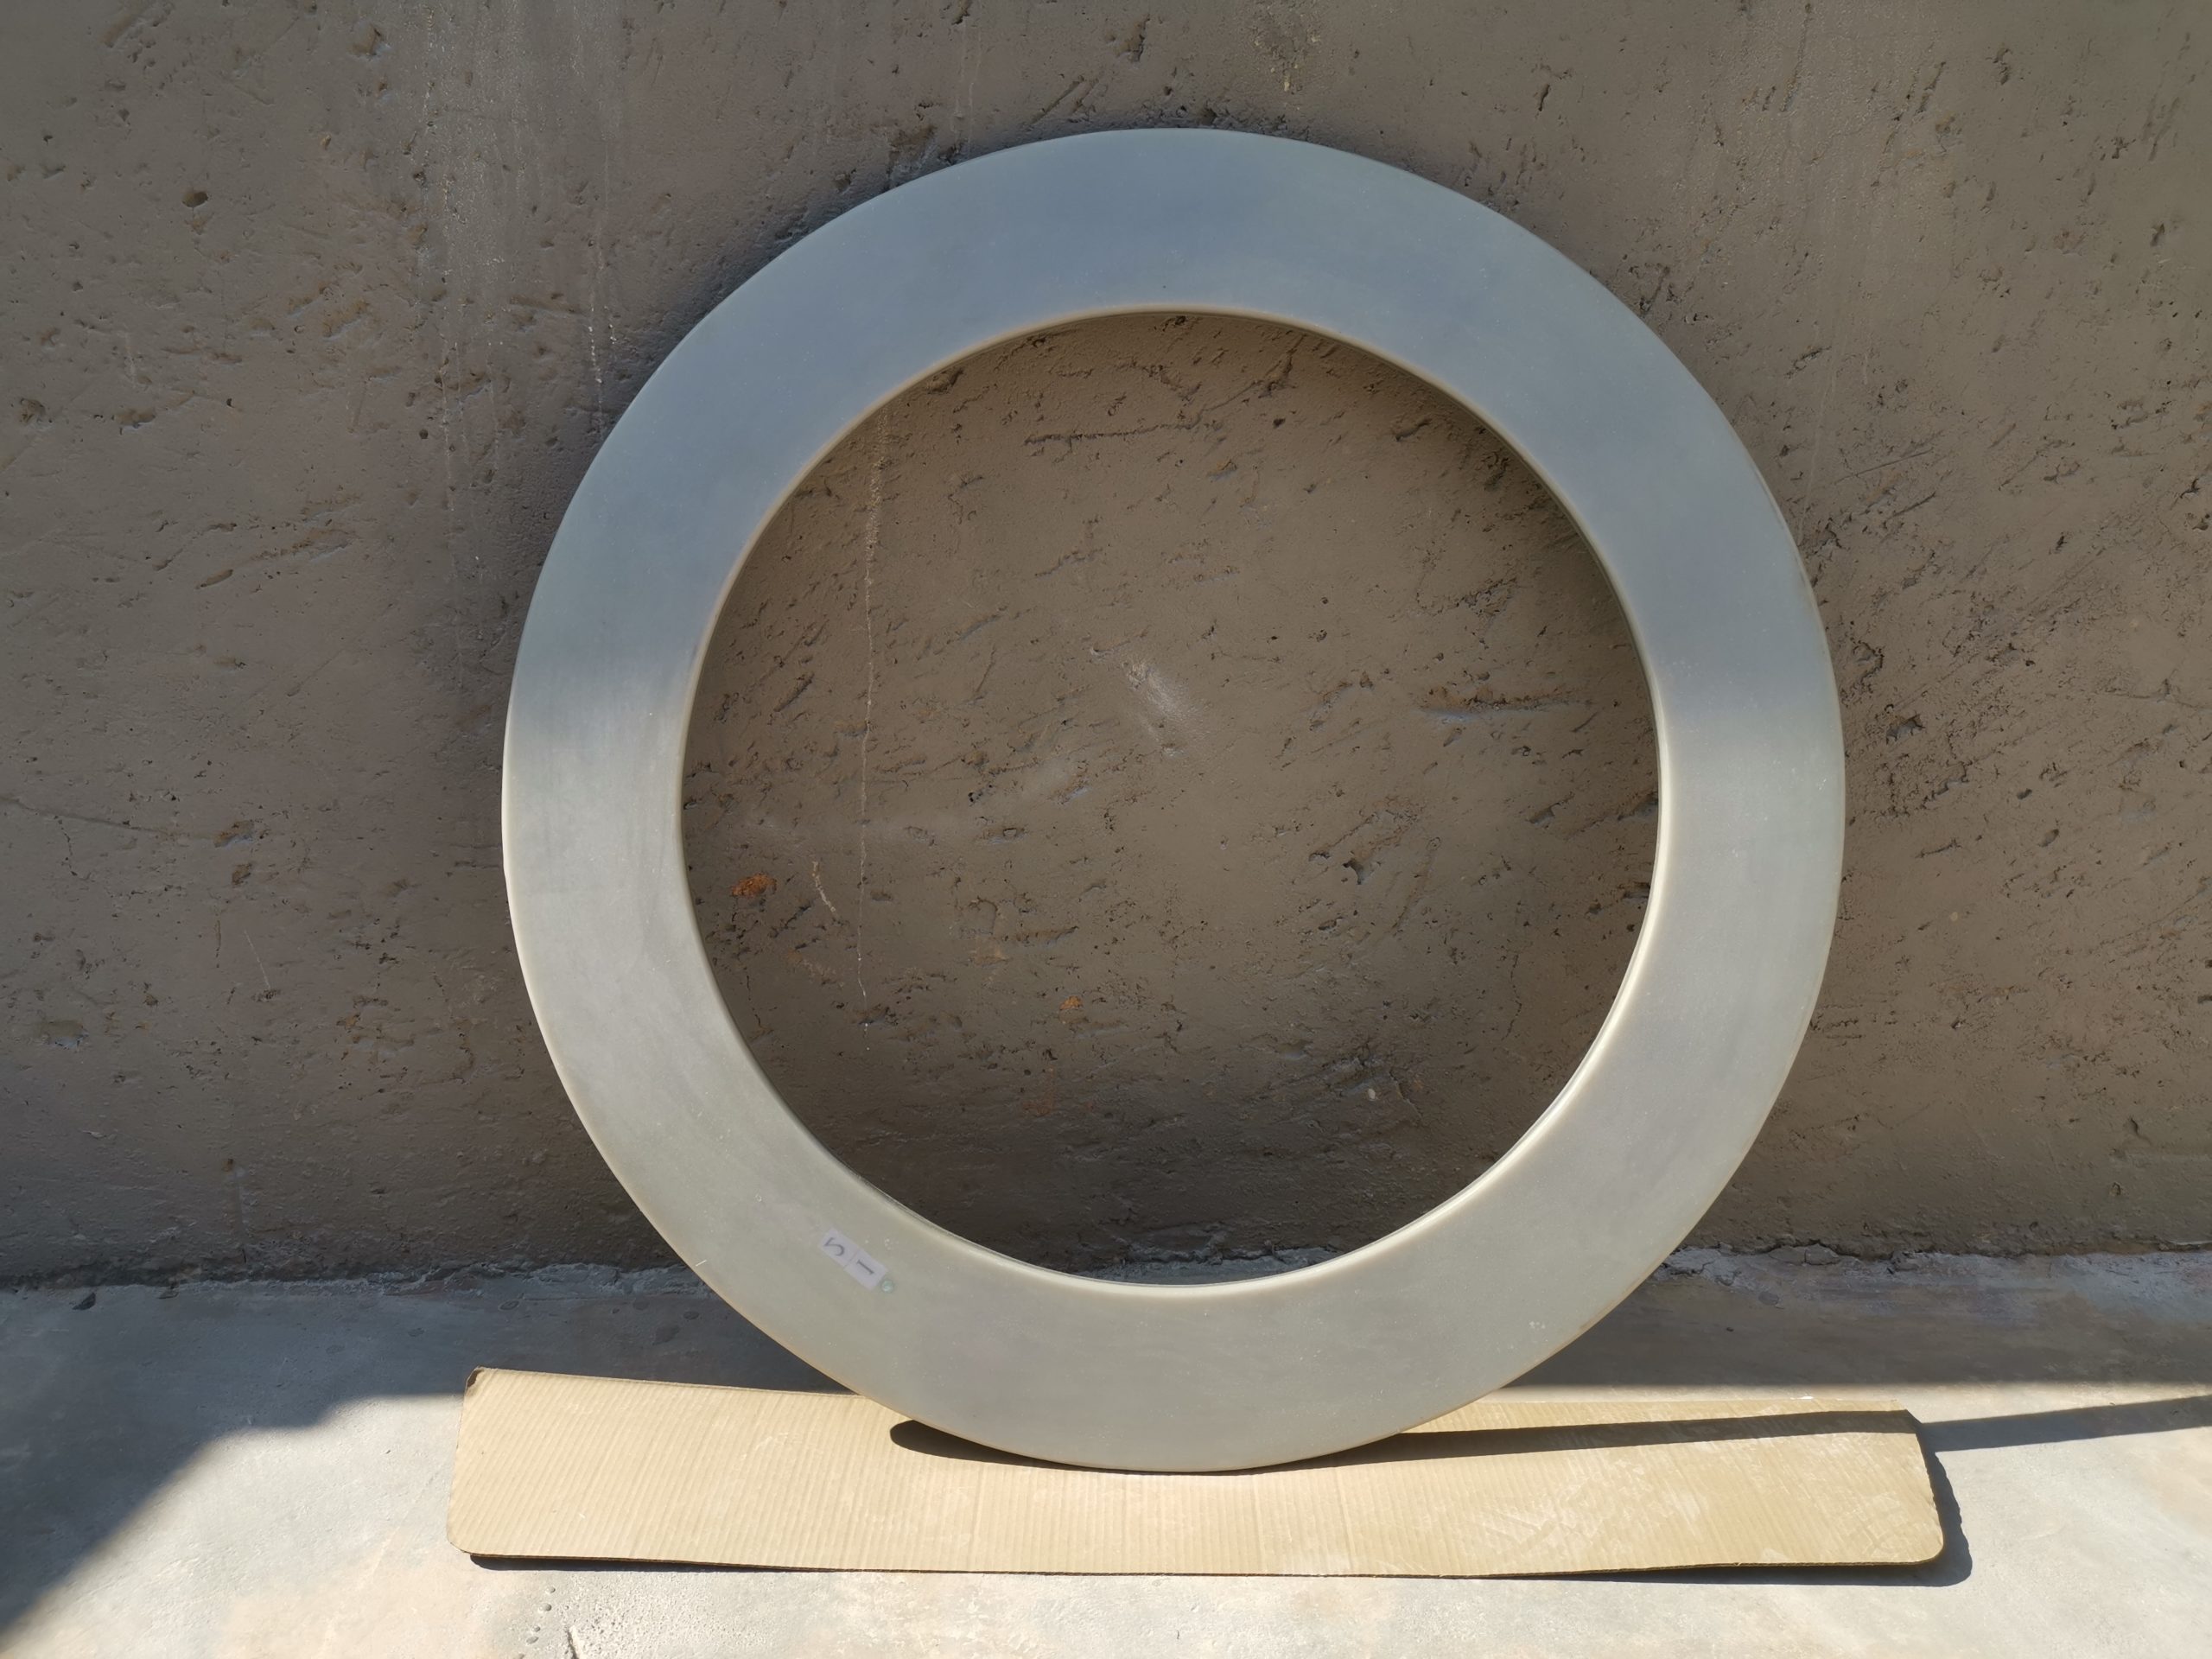 One flame retardant fibreglass ring leaning against a wall